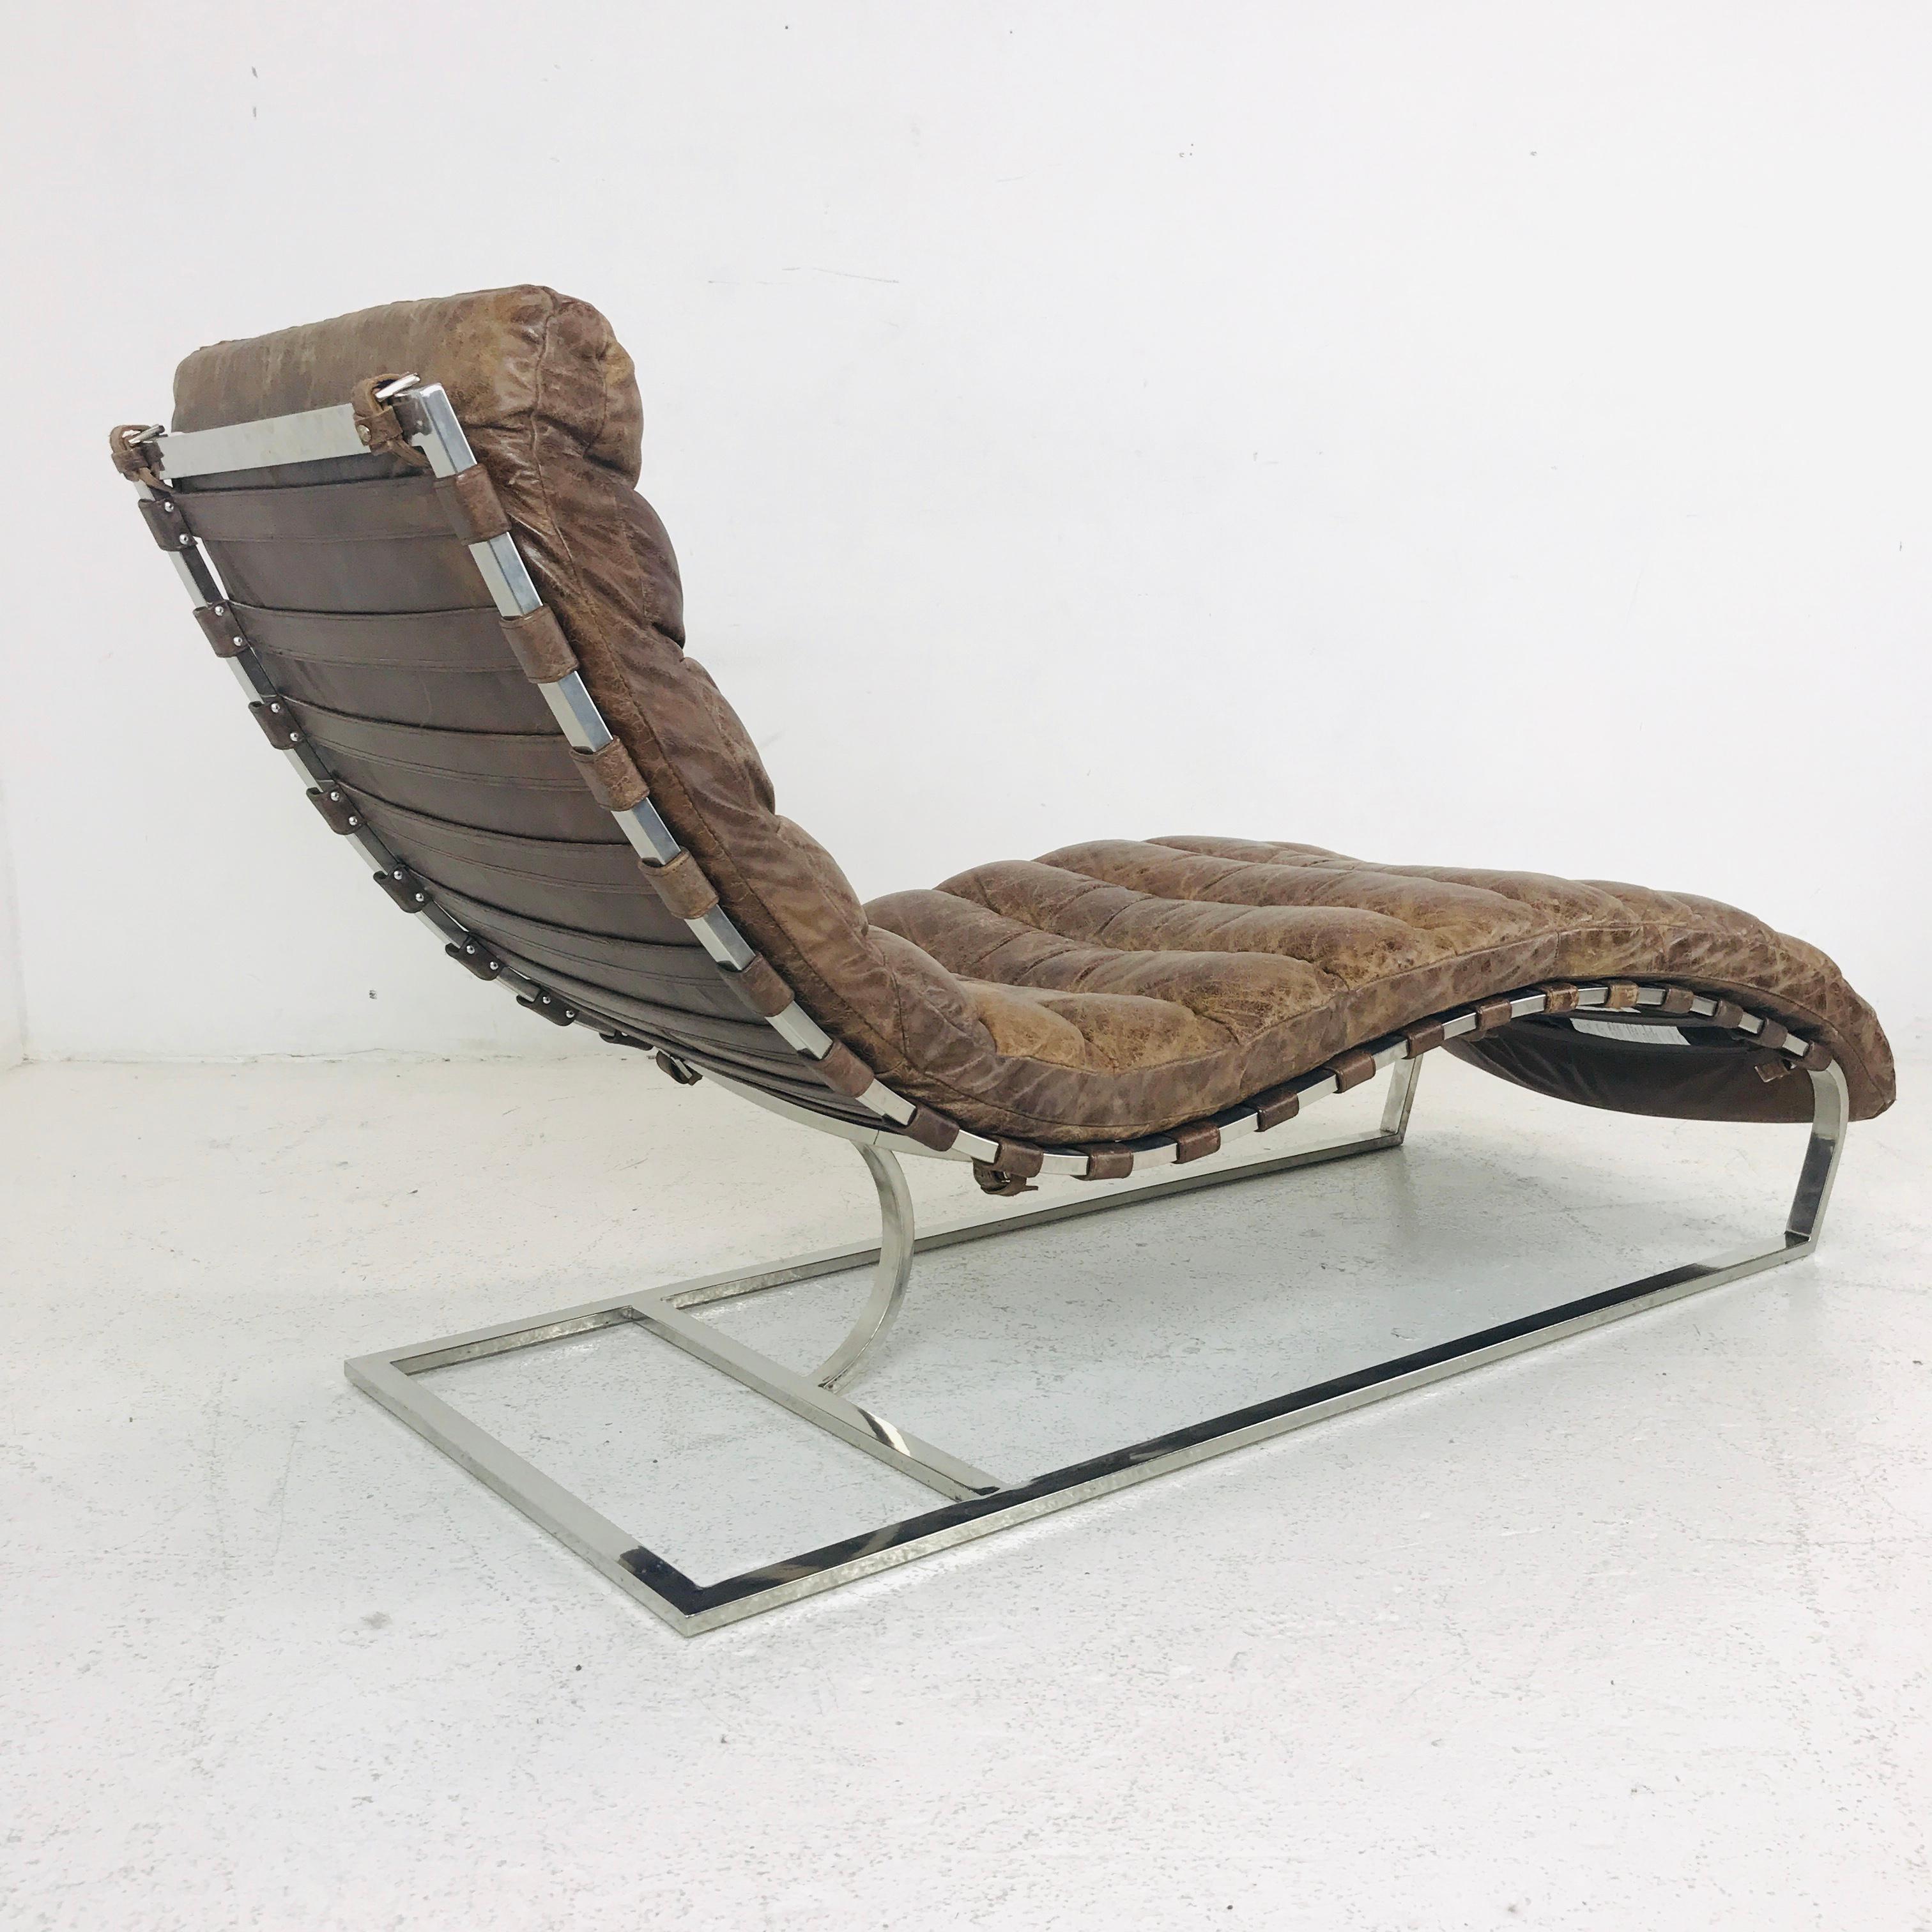 These stylish modern chaise longue chairs feature channeled brown leather with a distressed patina situated on chrome bases. Comfortable lounge design makes these an excellent seating option for home or office.